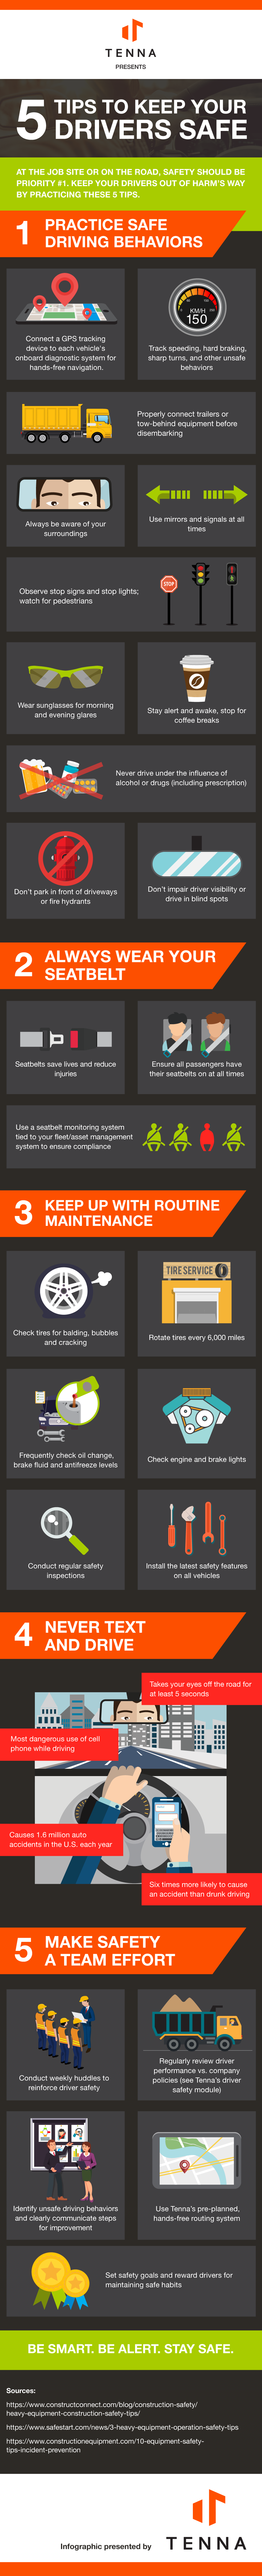 5 Tips to Keep Drivers Safe Infographic